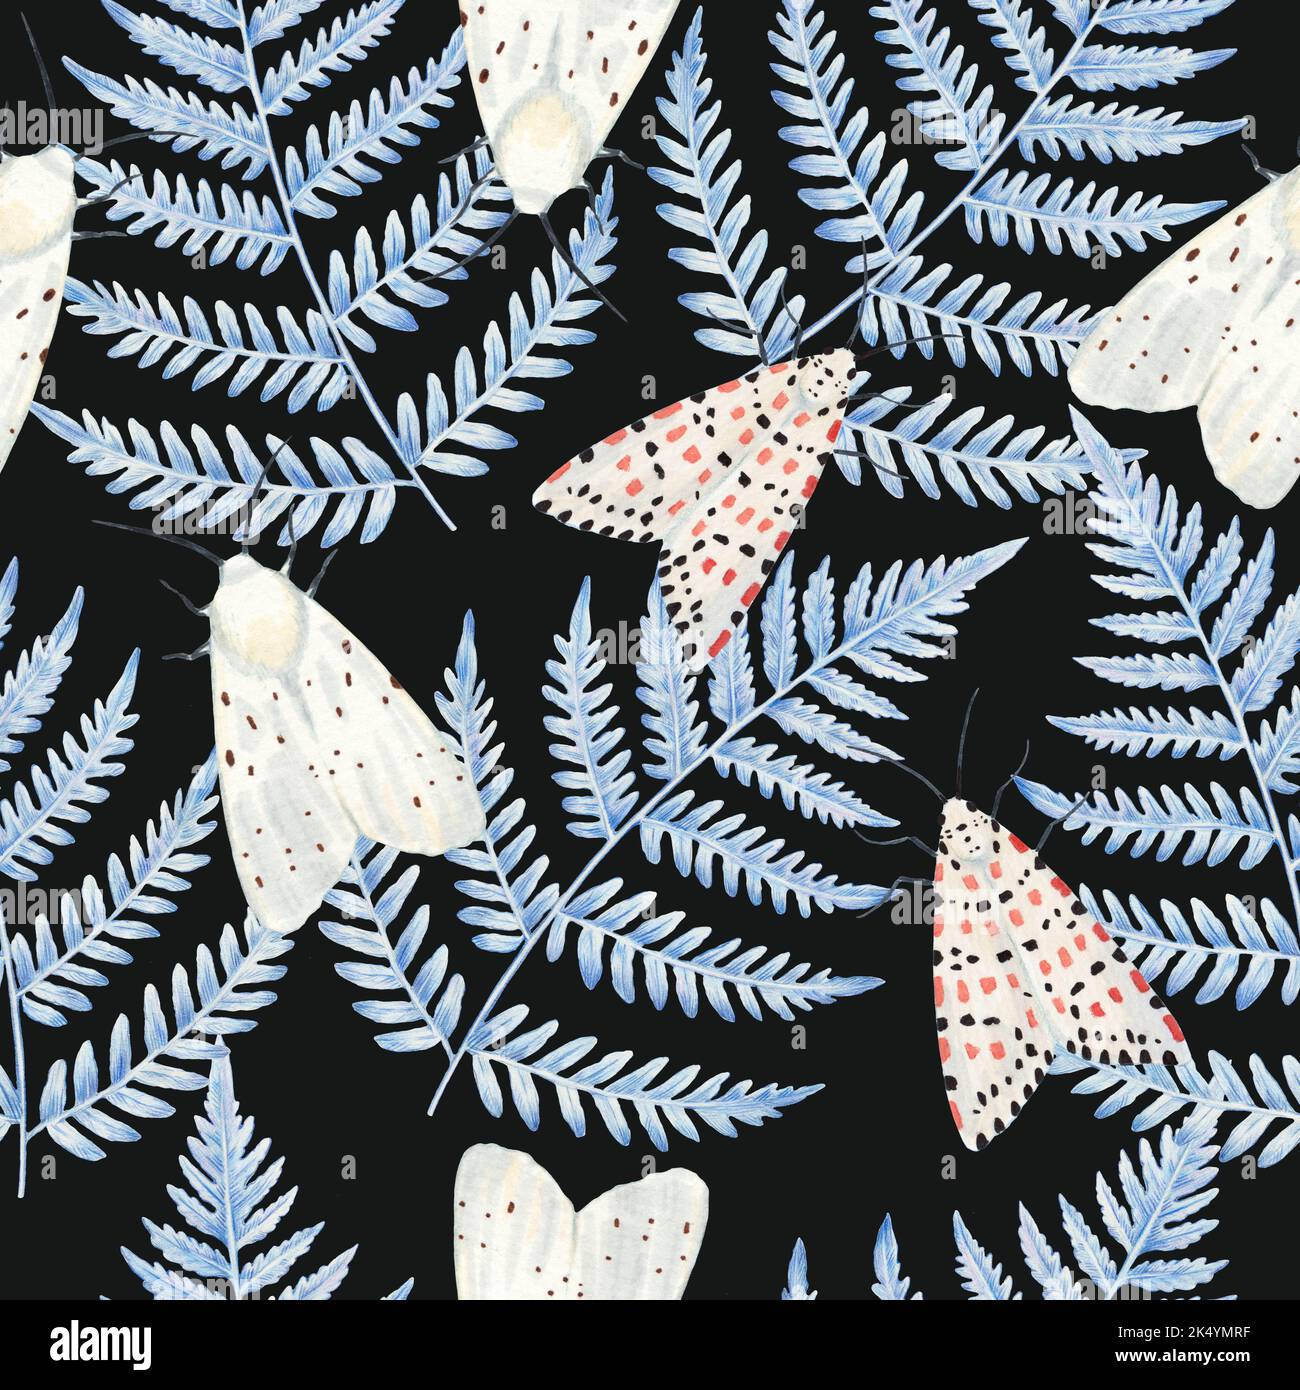 Hand drawn seamless pattern with fern leaves and white cute moths. Detailed watercolor botanical illustration. Stock Photo